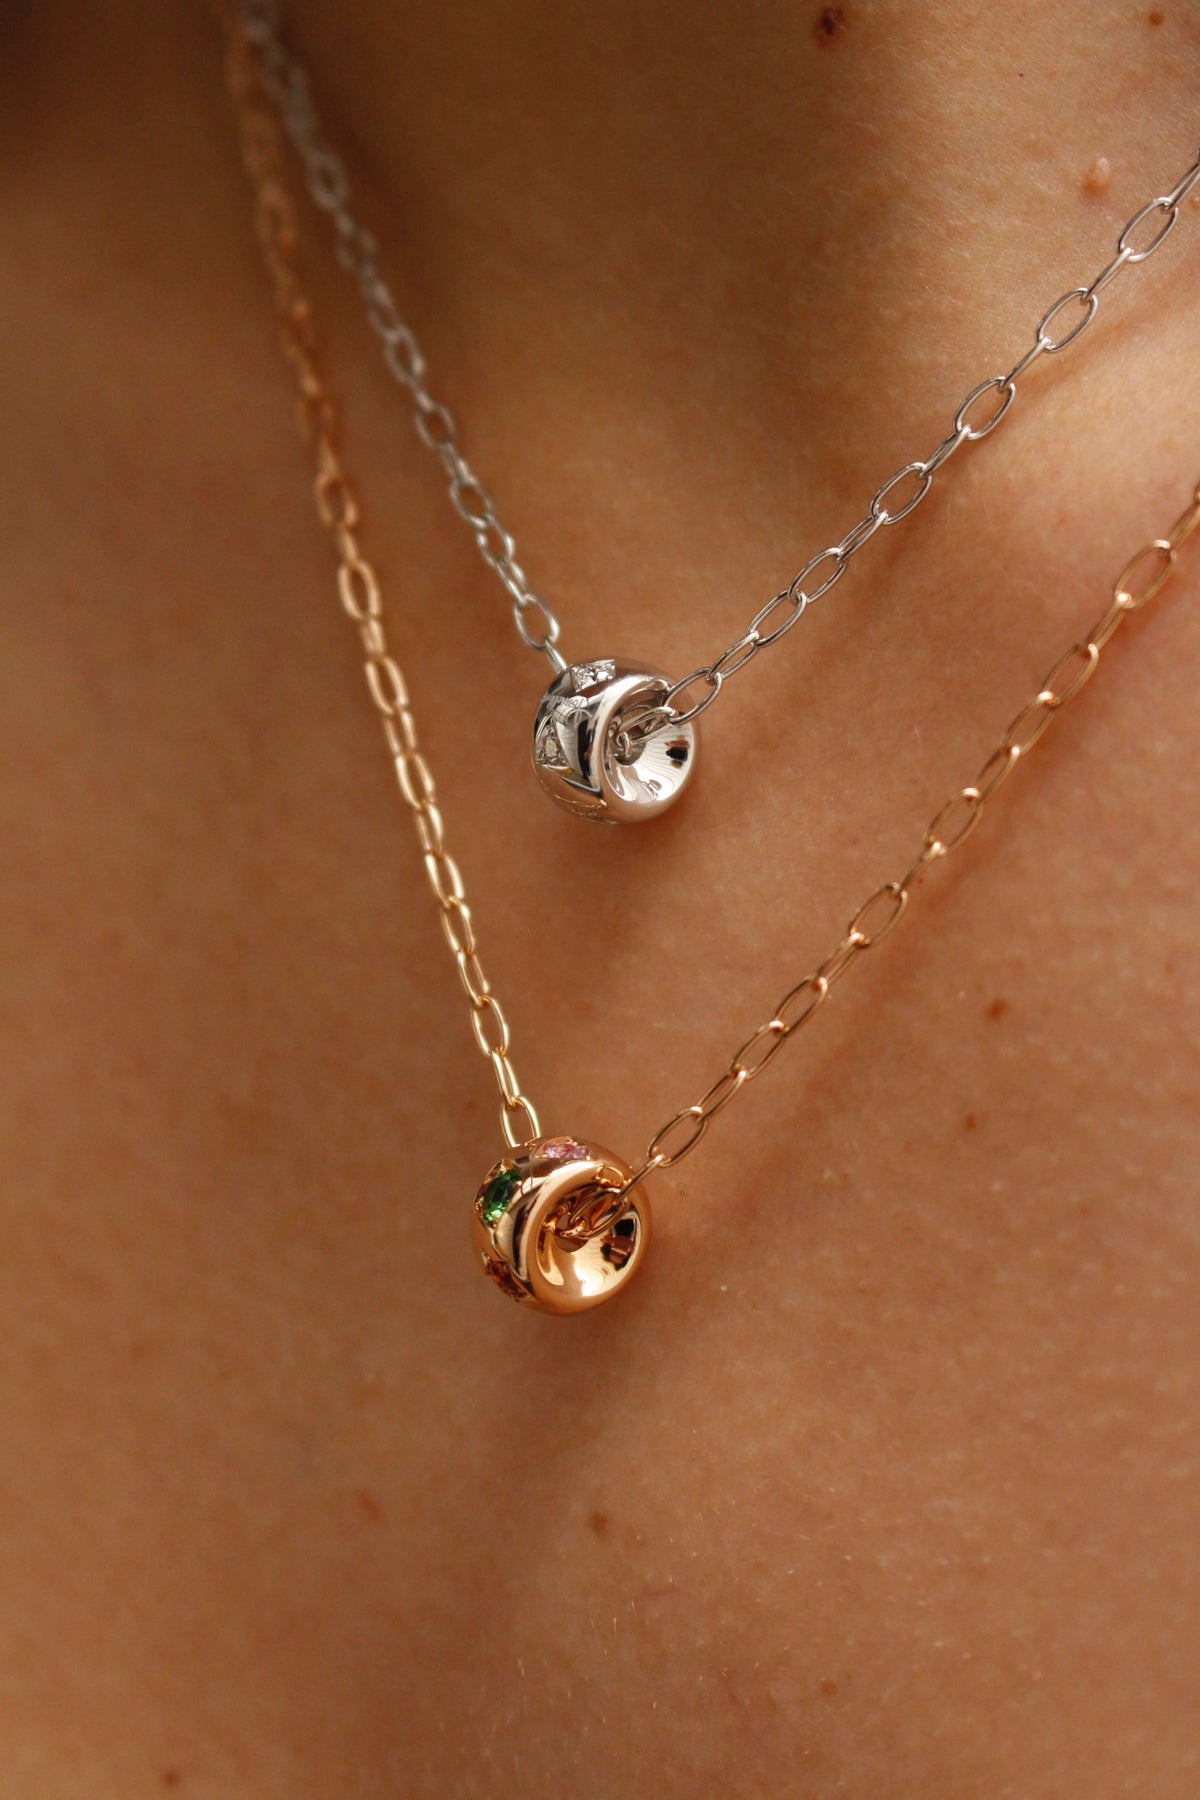 Pomellato Iconica Pendant with Chain in 18k Rose Gold with Coloured Gemstones - Orsini Jewellers